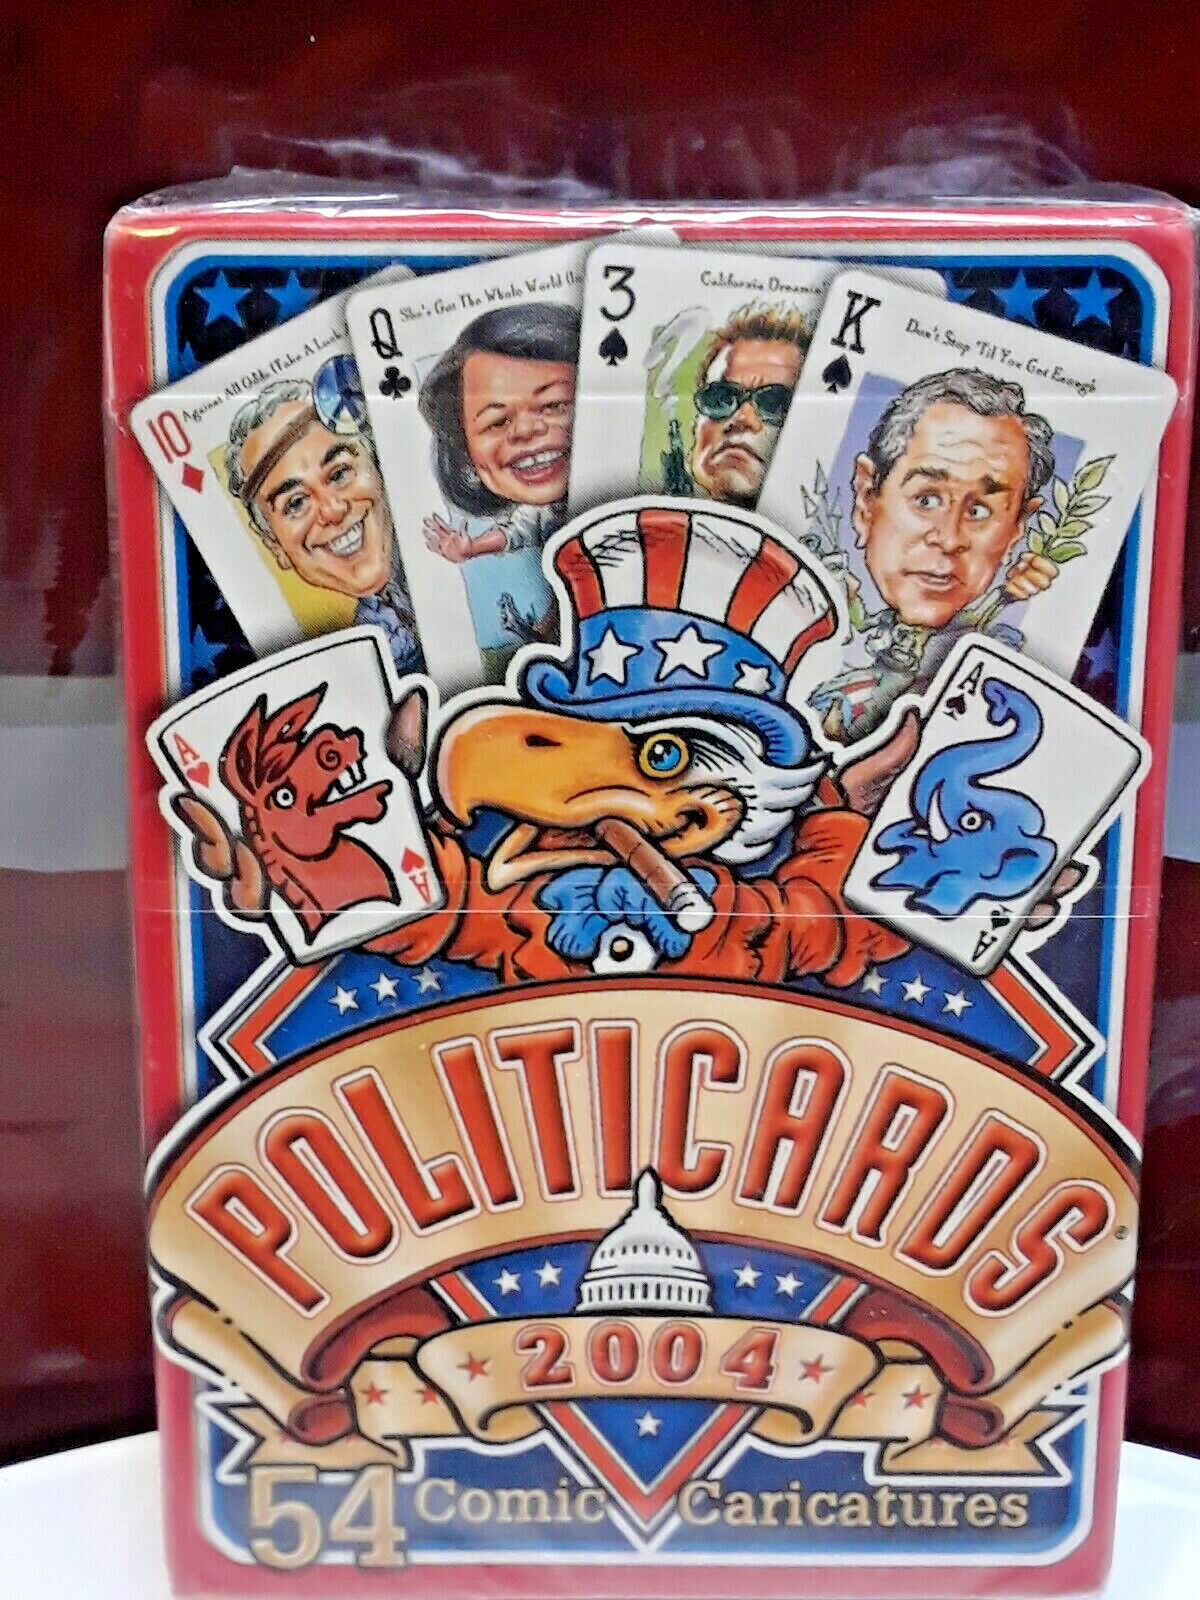 Politicards Political Cards 2004 Sealed Playing Card Deck 54 Comic Caricature Ca